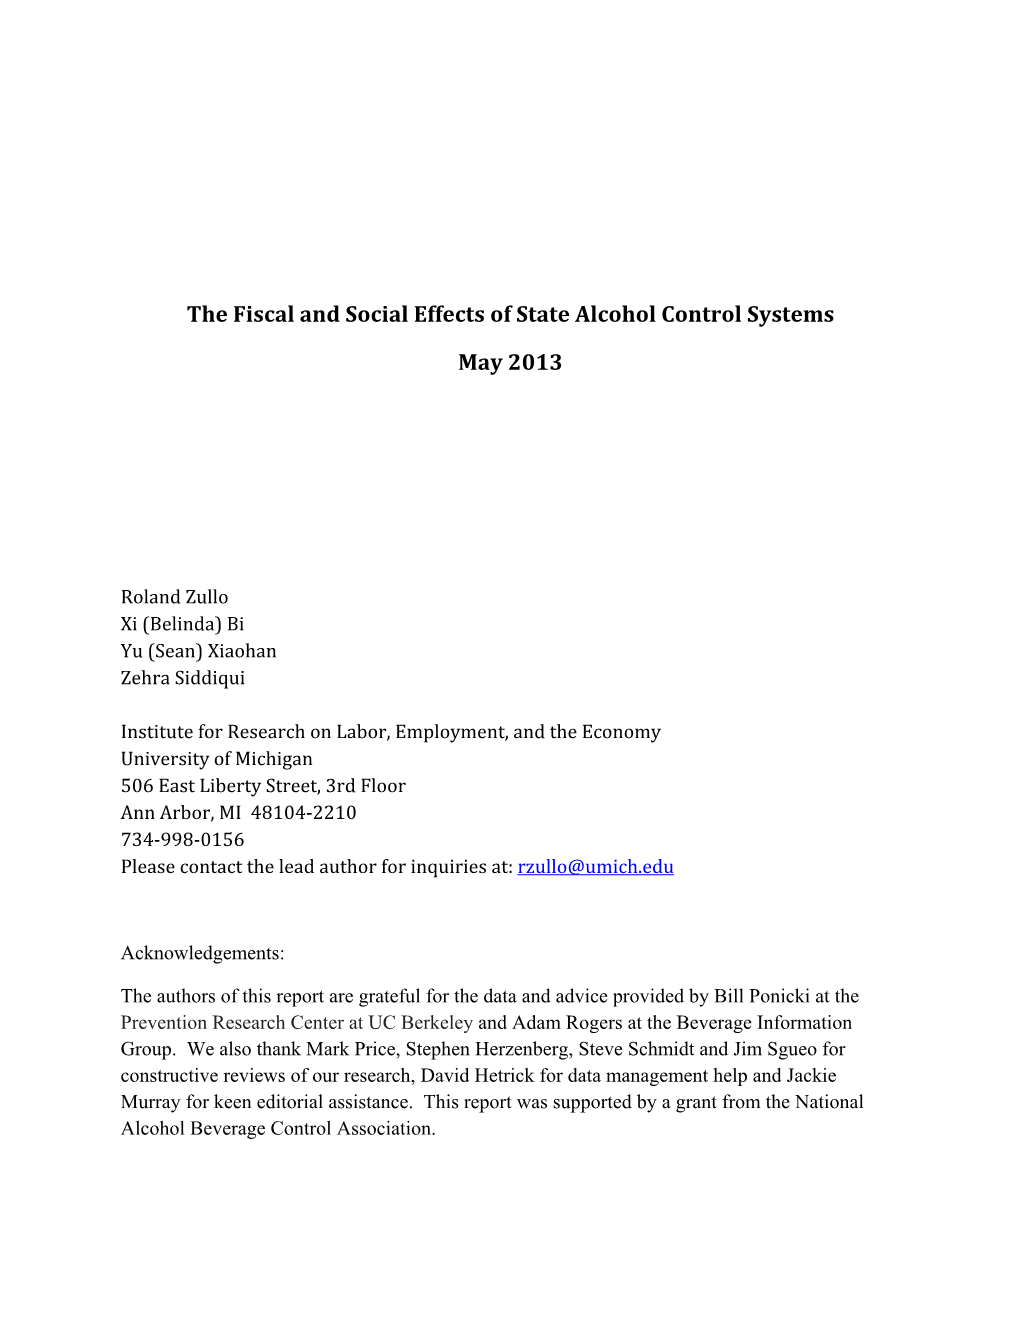 The Fiscal and Social Effects of State Alcohol Control Systems May 2013